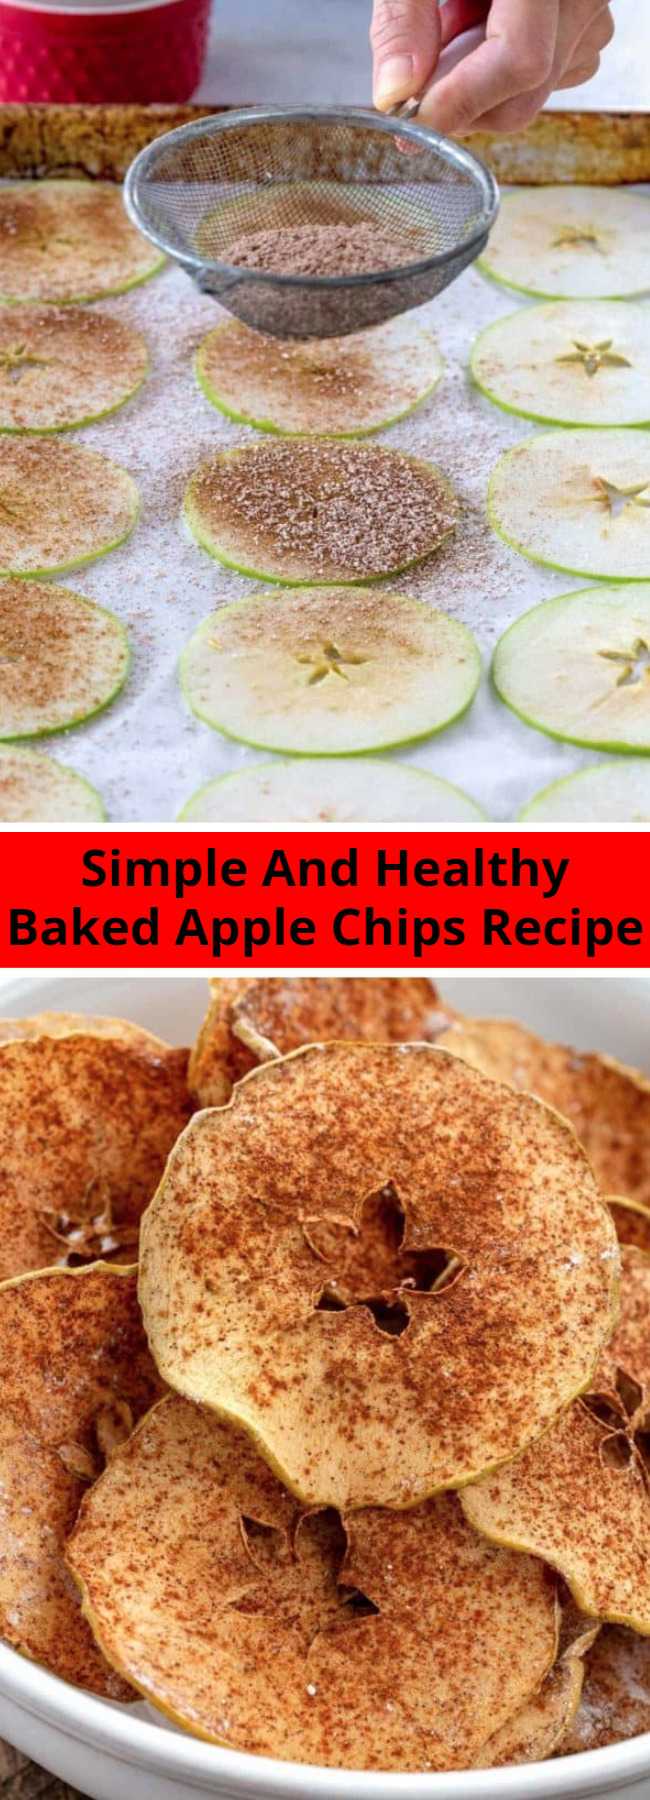 Simple And Healthy Baked Apple Chips Recipe - Chose your favorite apple variety to make these simple and healthy baked cinnamon apple chips! Cinnamon enhances the flavor while cutting the apples into thin slices, and baking at a low oven temperature for a few hours ensures super crispy chips. These crisp apple chips are delicious and addicting, without the guilt!